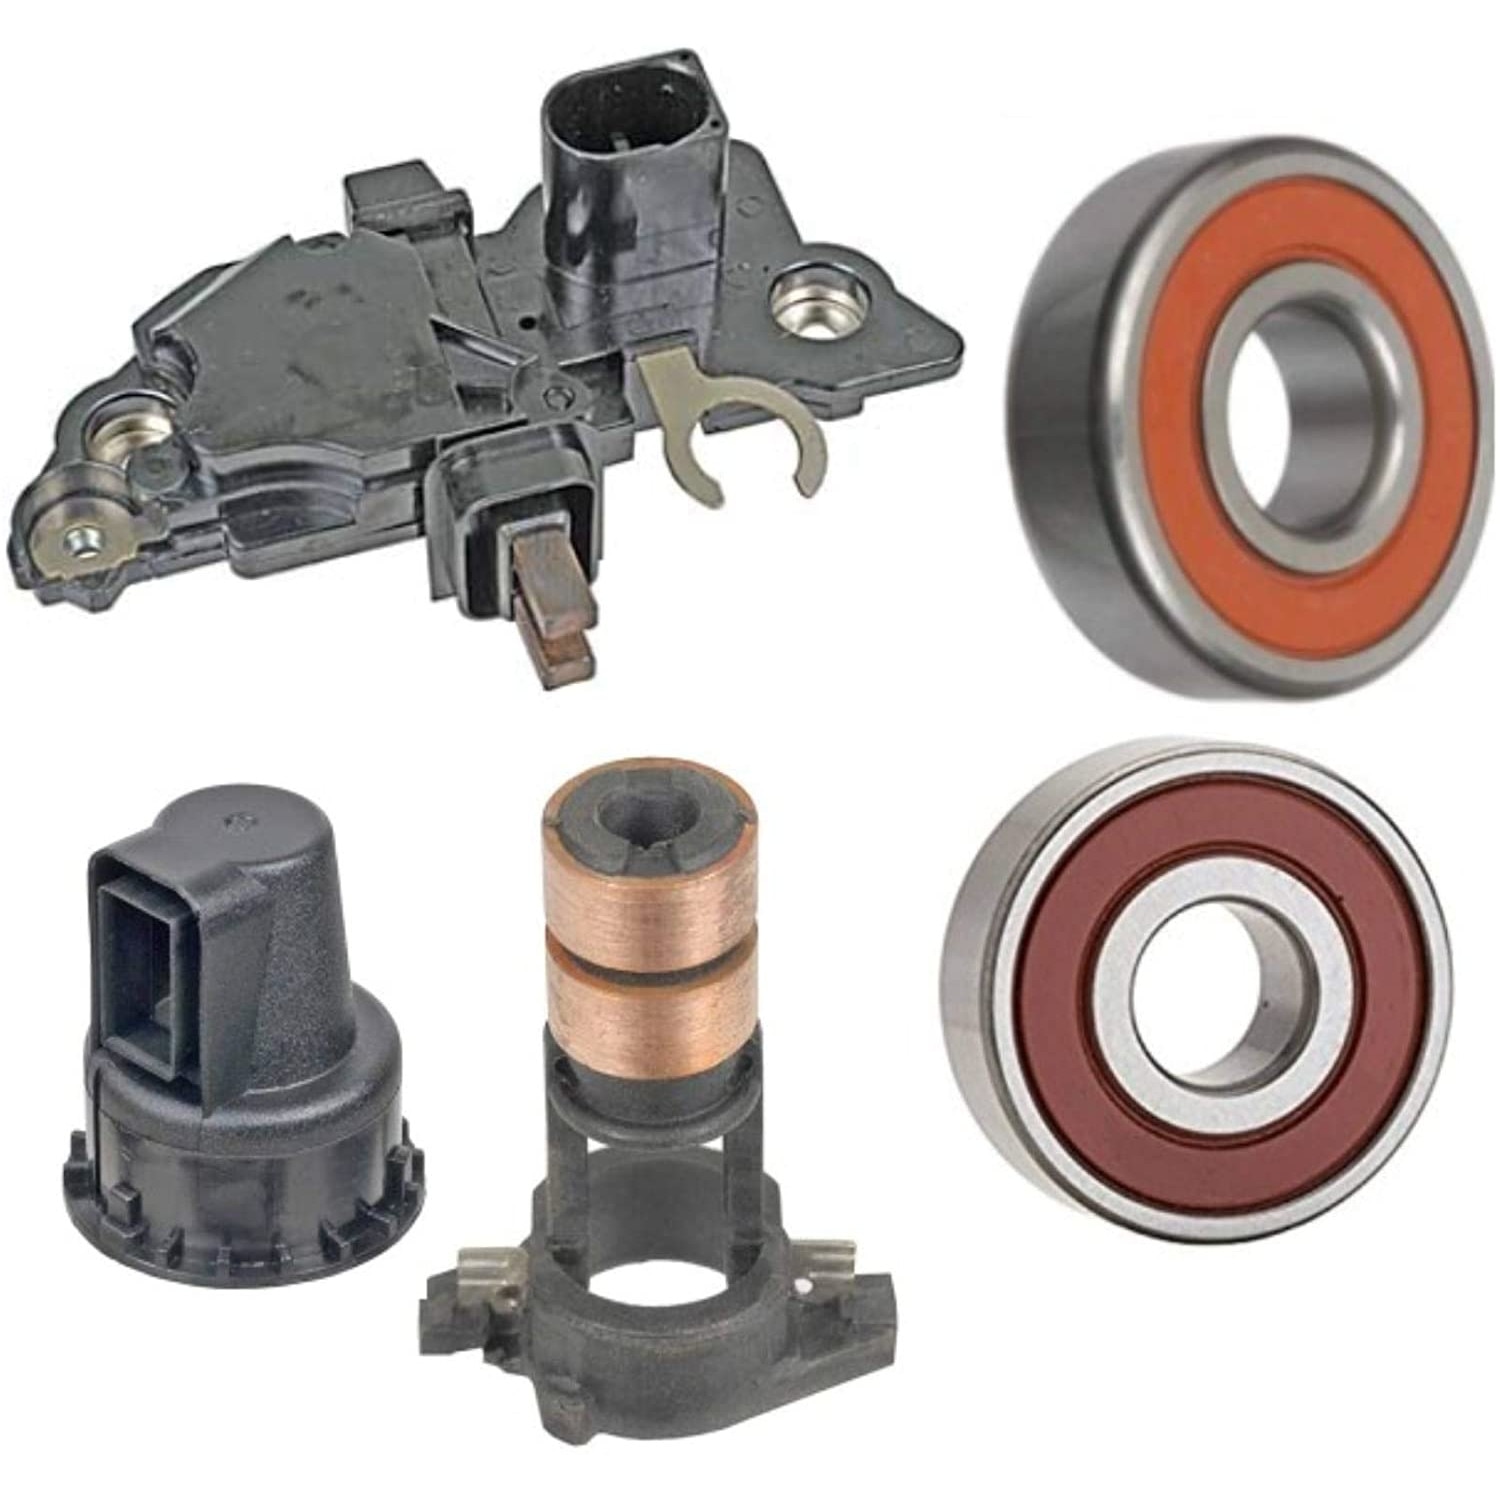 Chip sextant move on Kit reparatie alternator VW - Releu, rulmenti, colector, carcasa rulment -  eMAG.ro